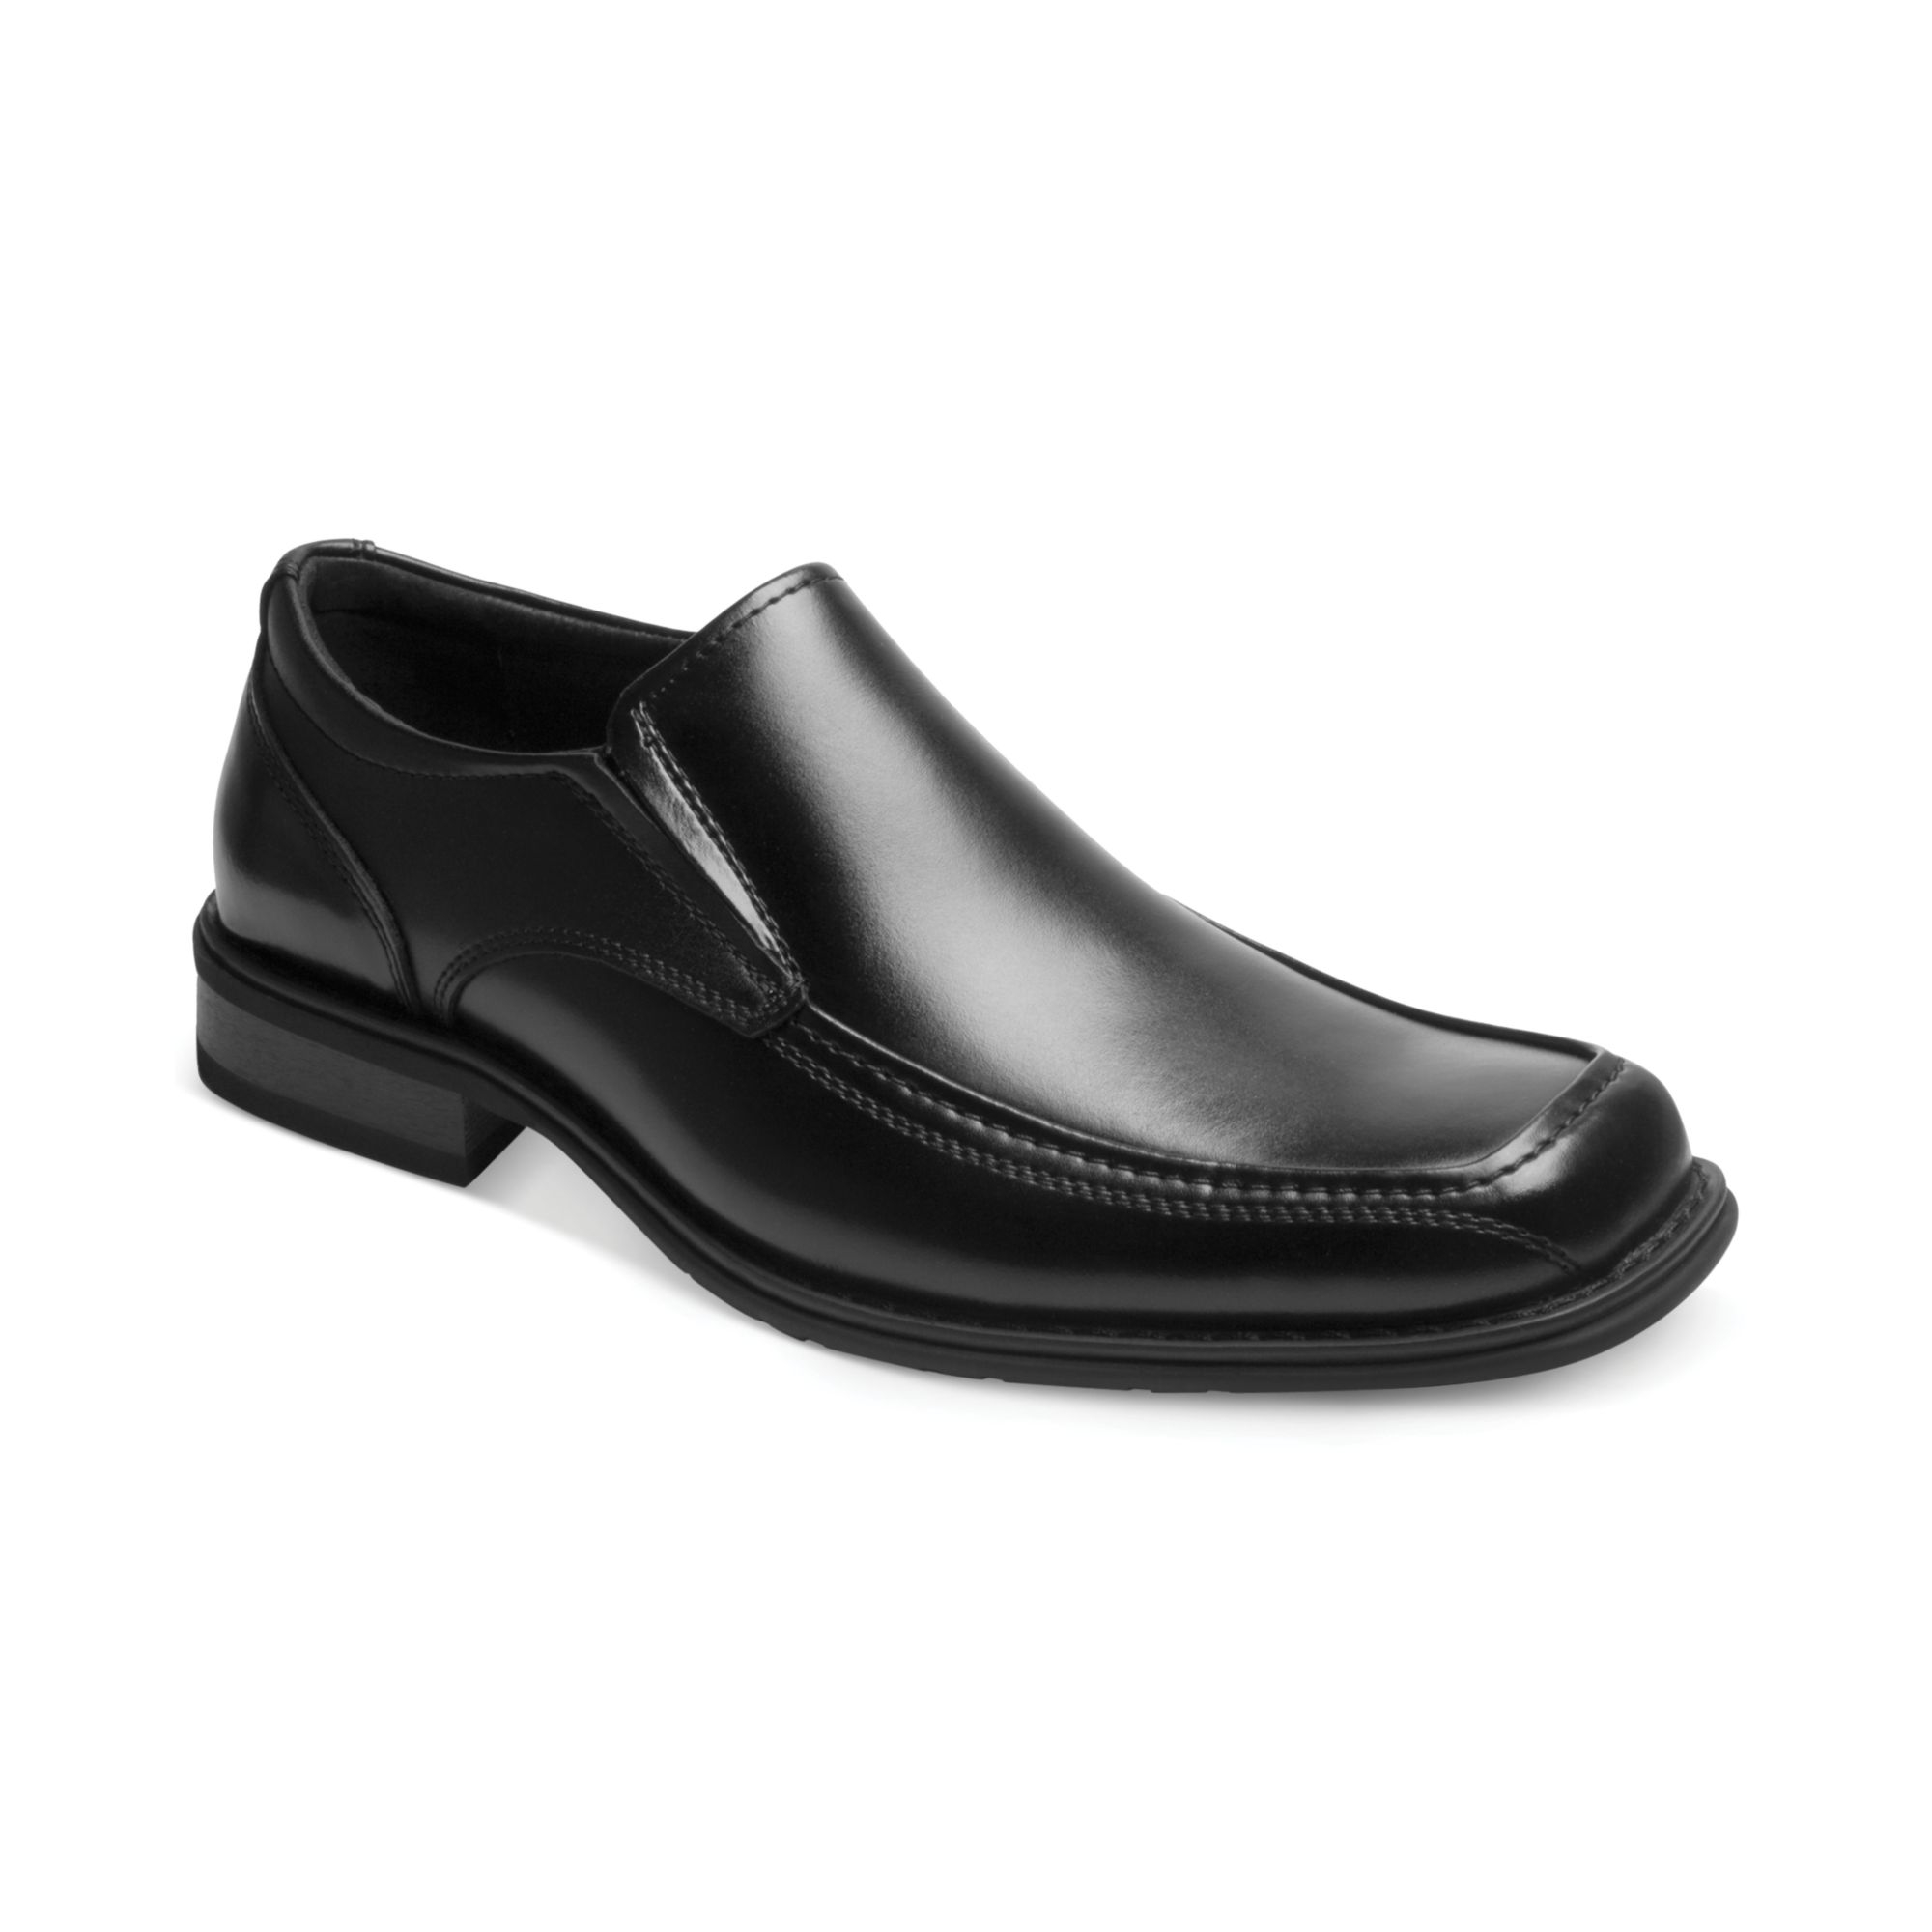 G.H.BASS Alberta Loafers in Black for Men - Lyst